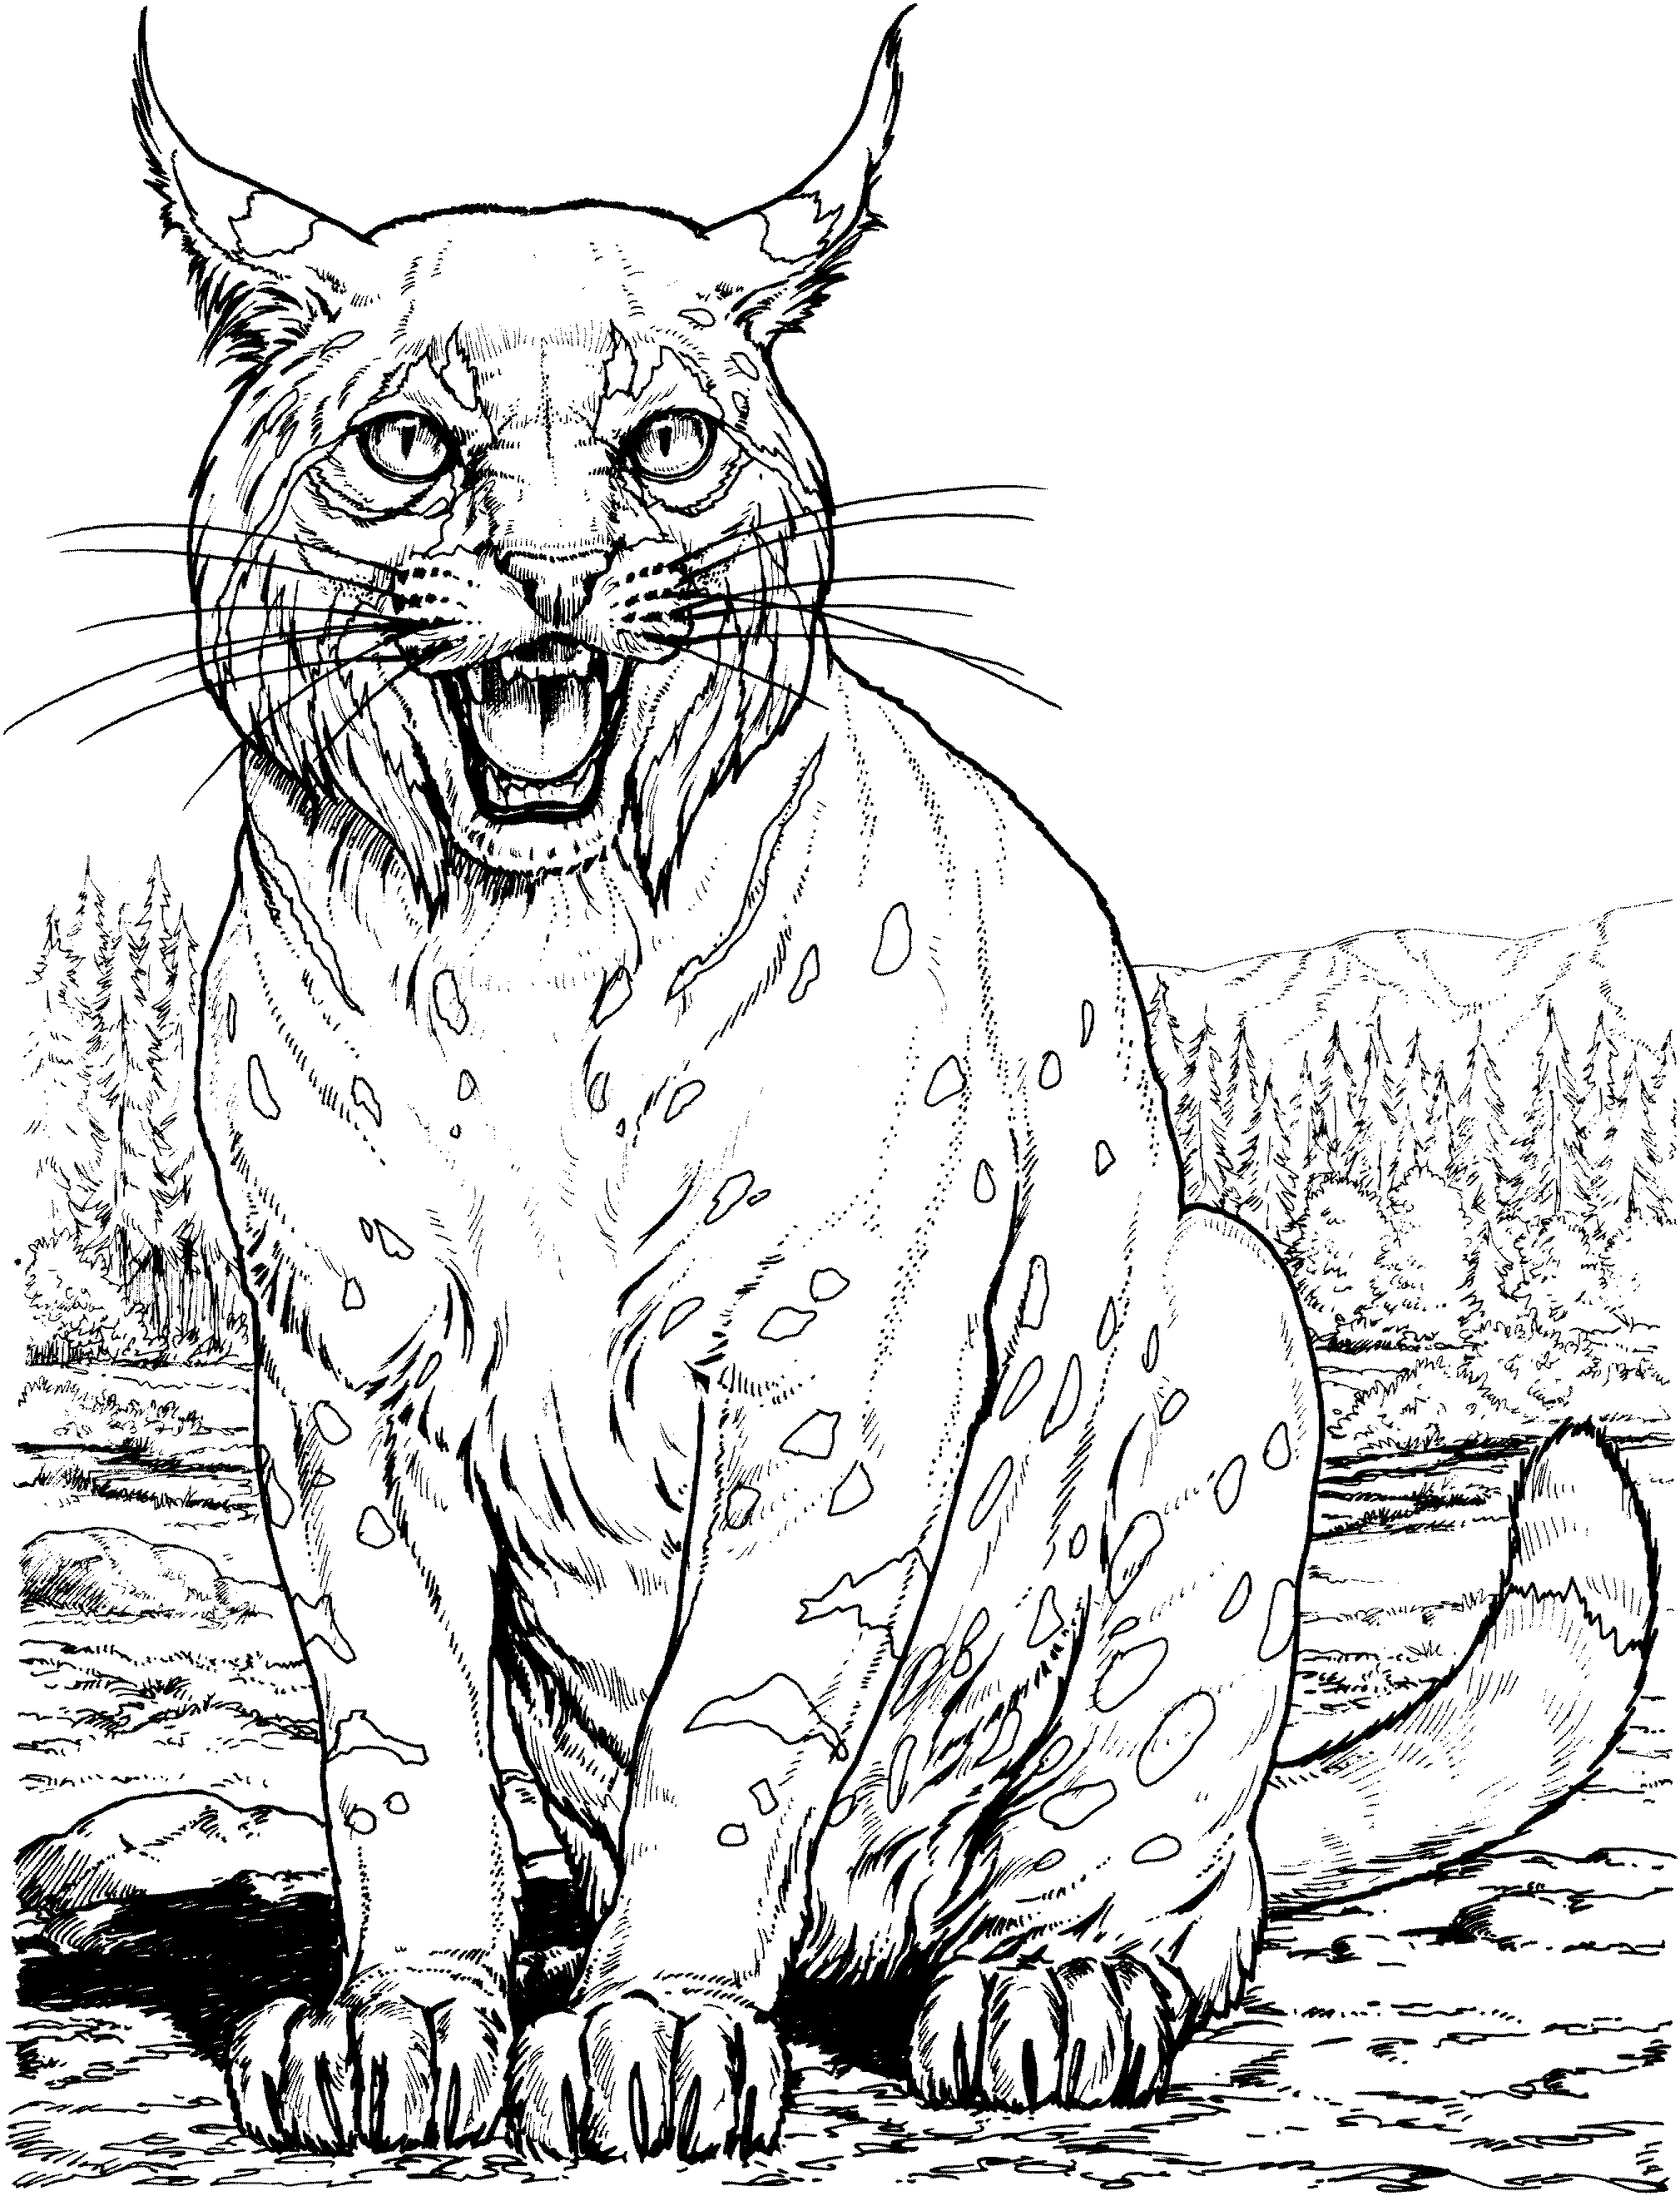 bobcat coloring pictures bobcat coloring pages getcoloringpagescom bobcat pictures coloring 